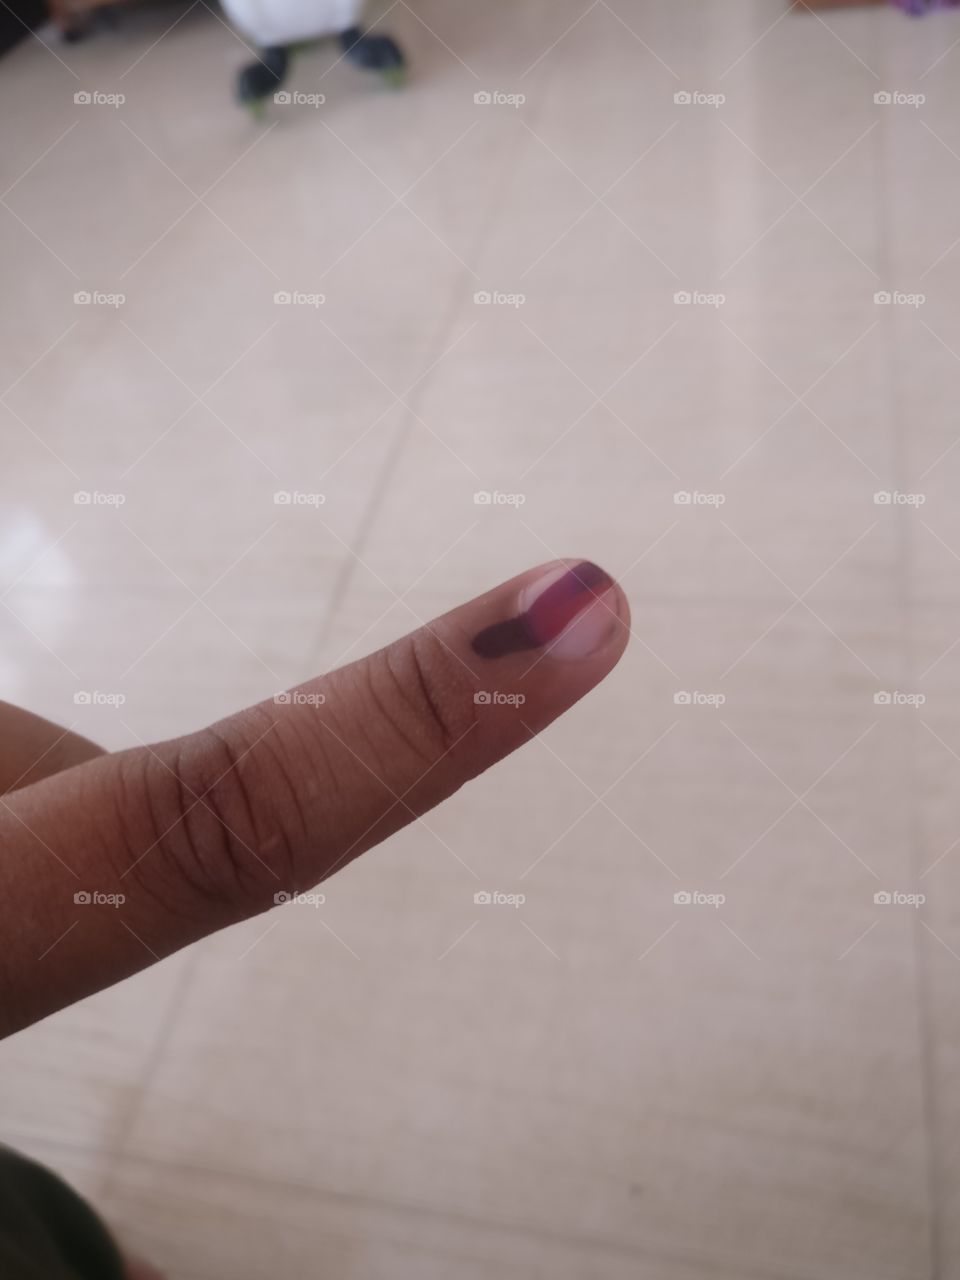 Symbol of vote, in largest democracy in the world